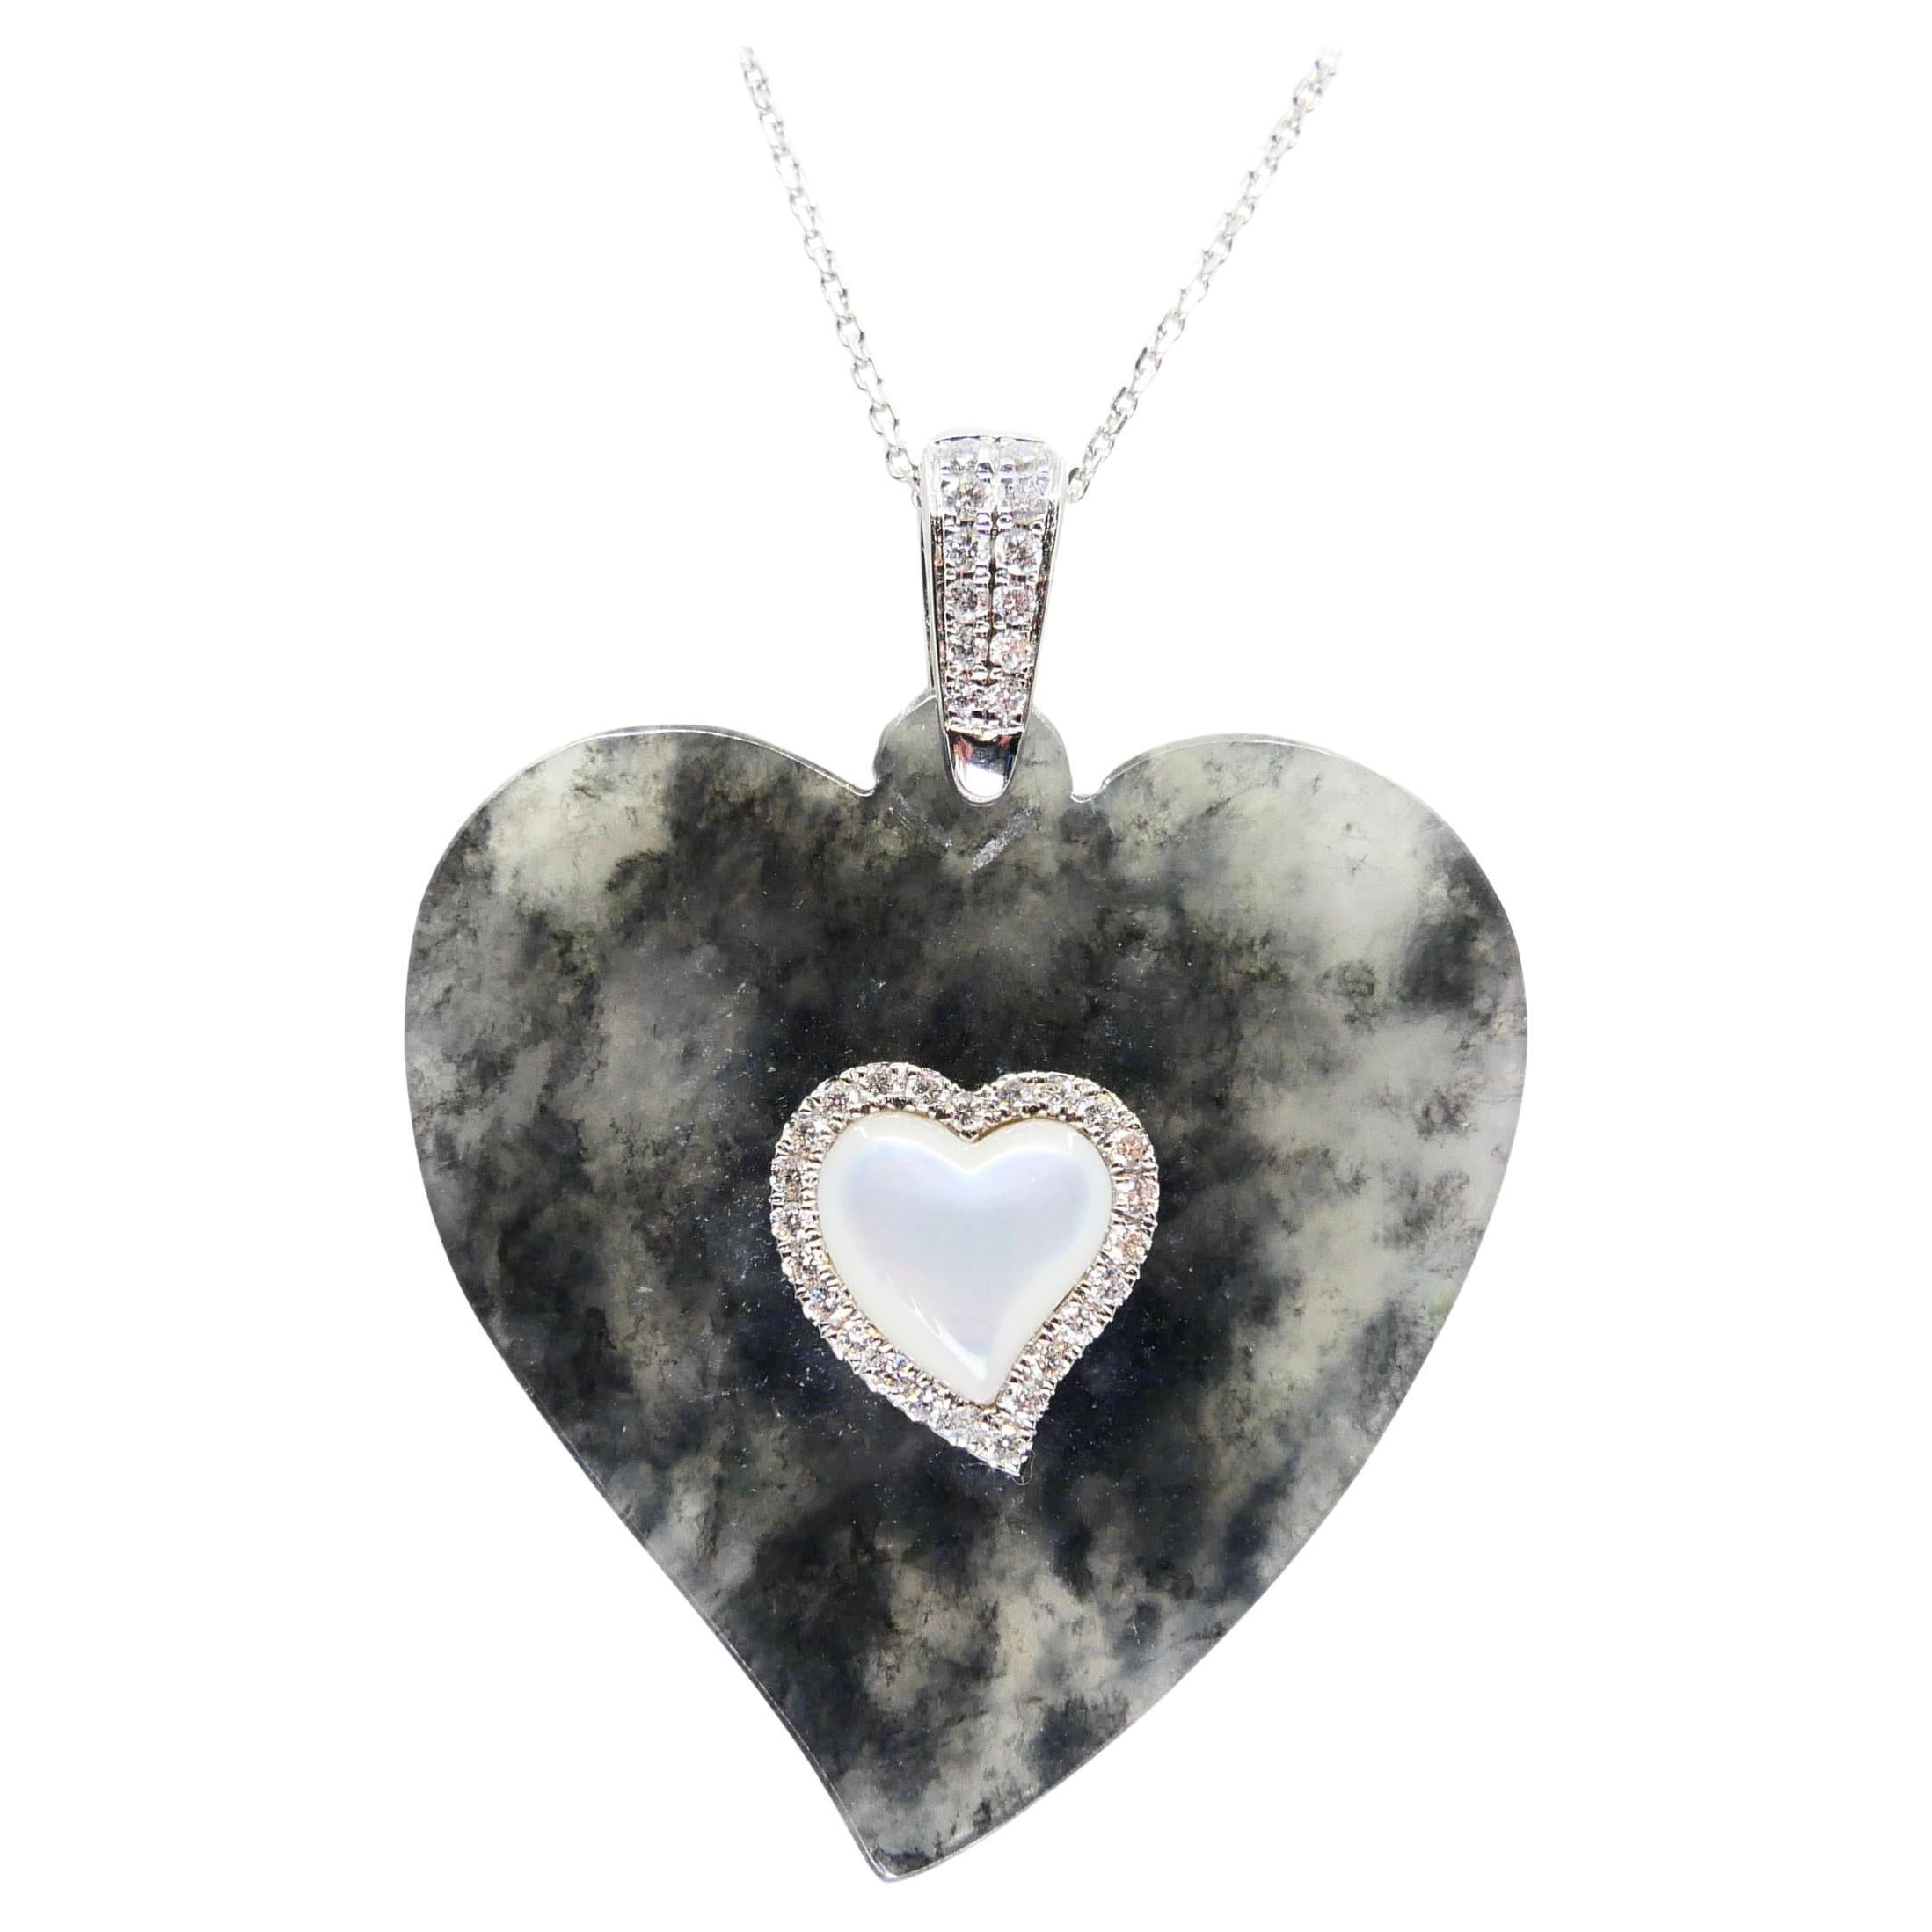 What does a heart pendant symbolize?